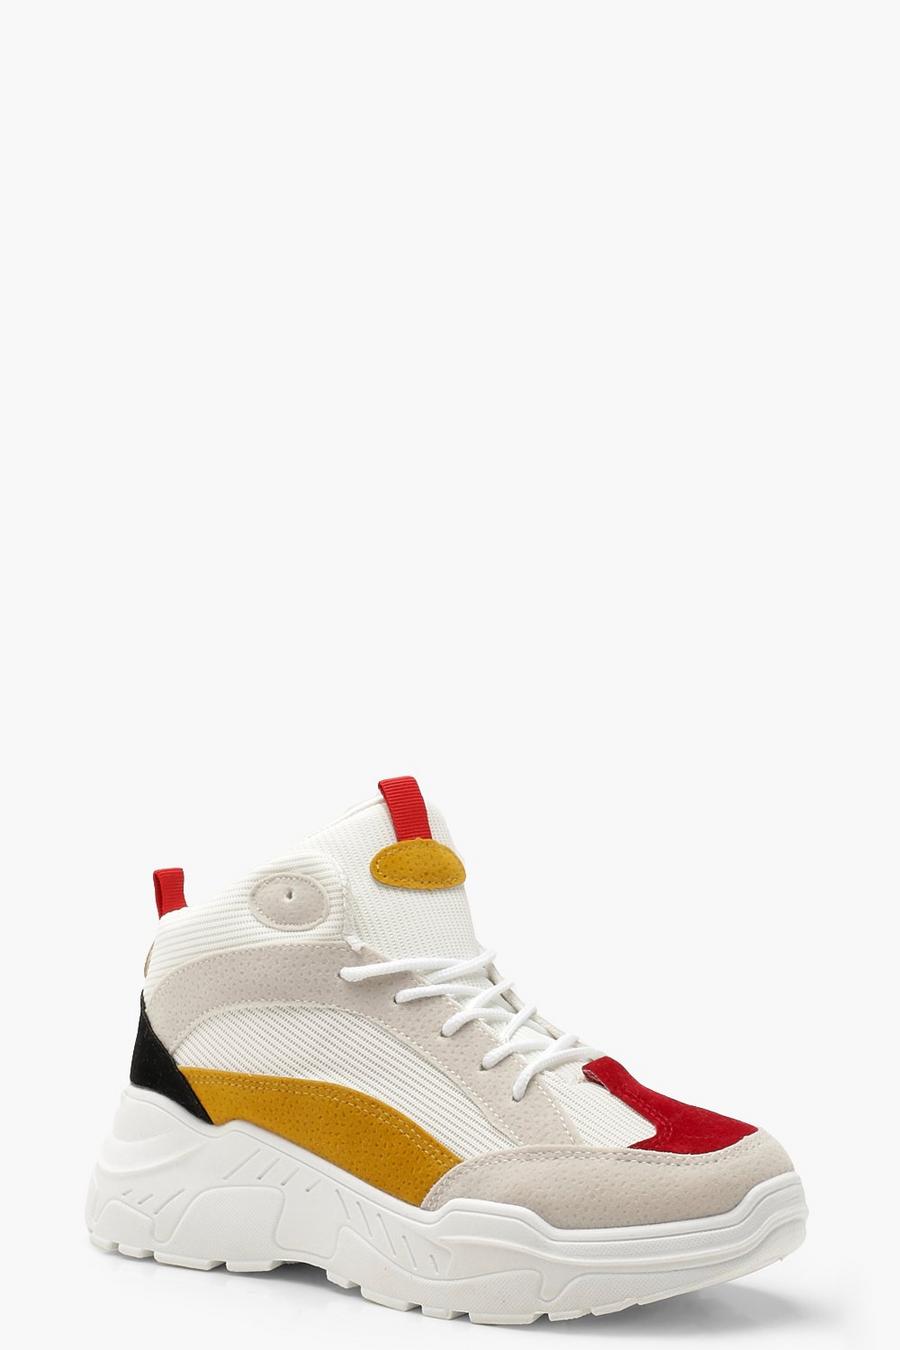 Hohe Colorblock-Sneaker mit dicker Sohle, Rot image number 1